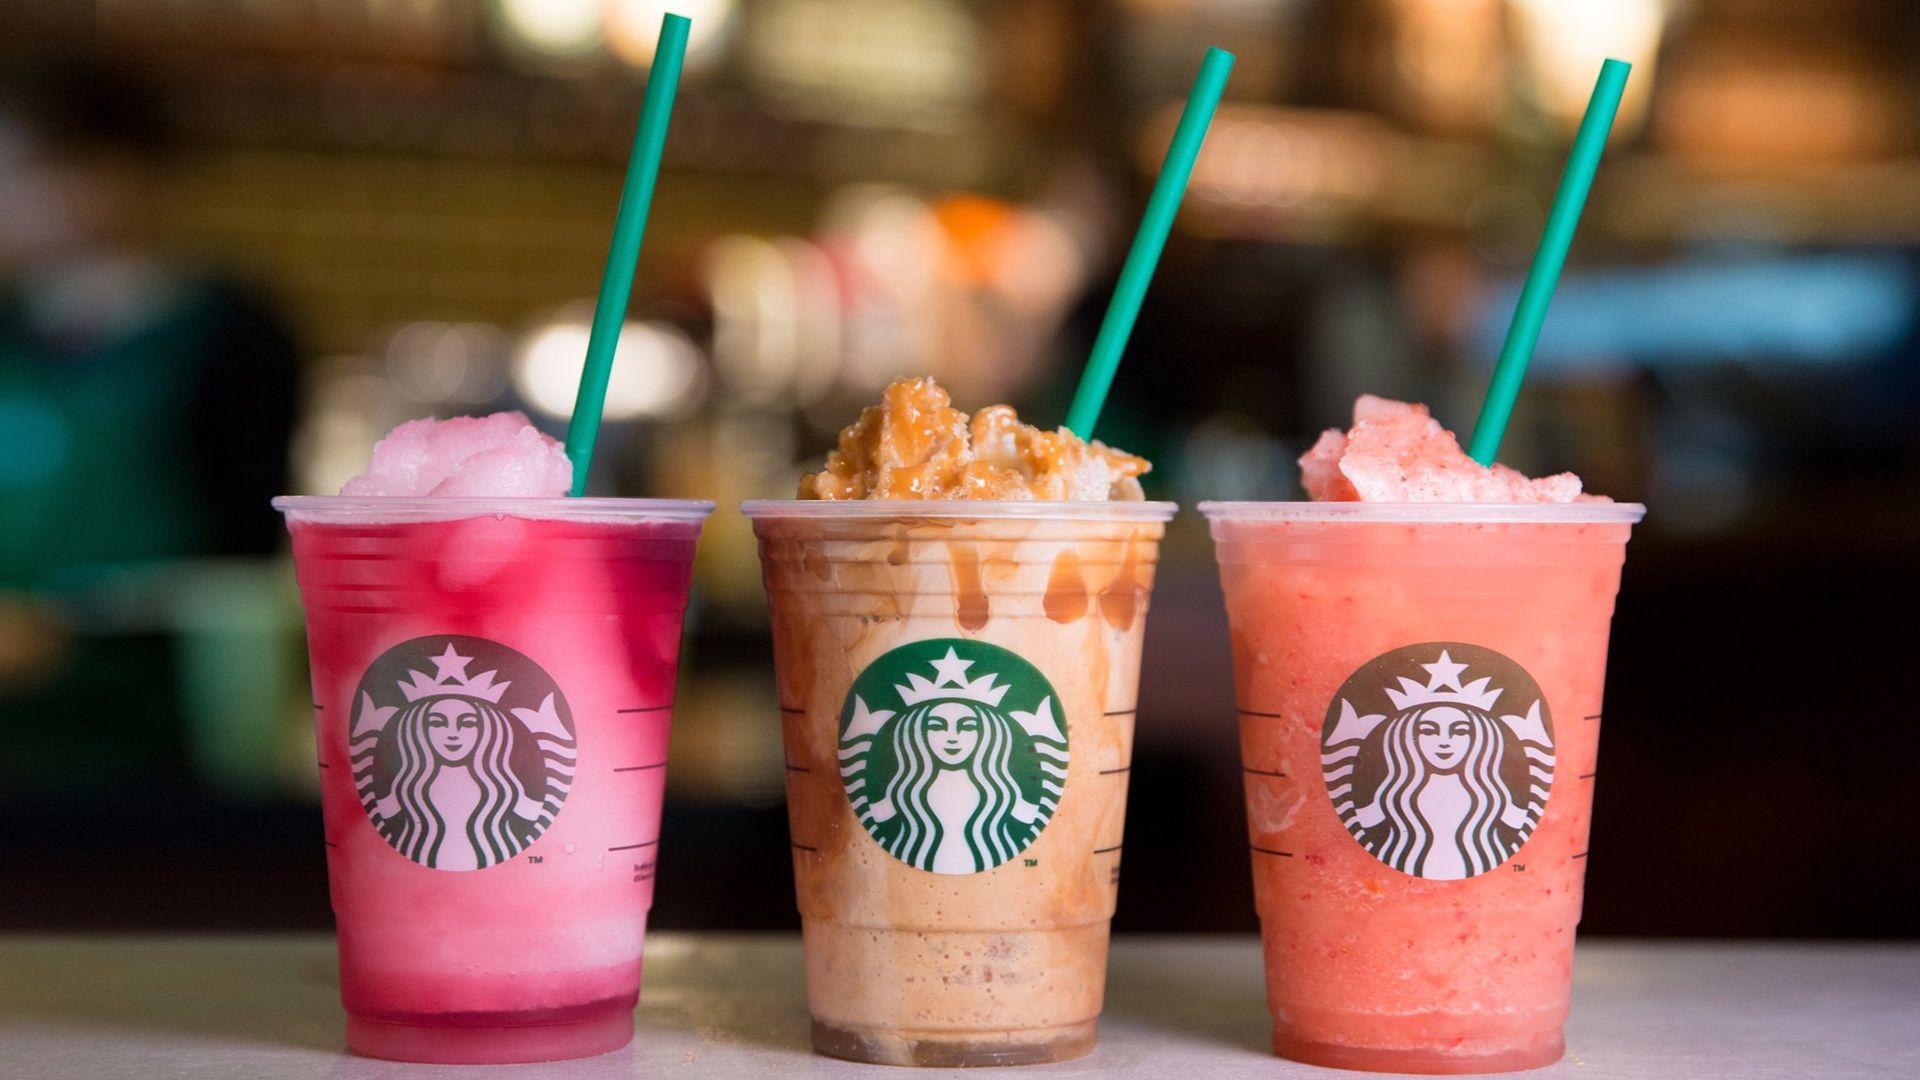 Frappuccino Starbucks Wallpapers in Six Cups of New Flavors.